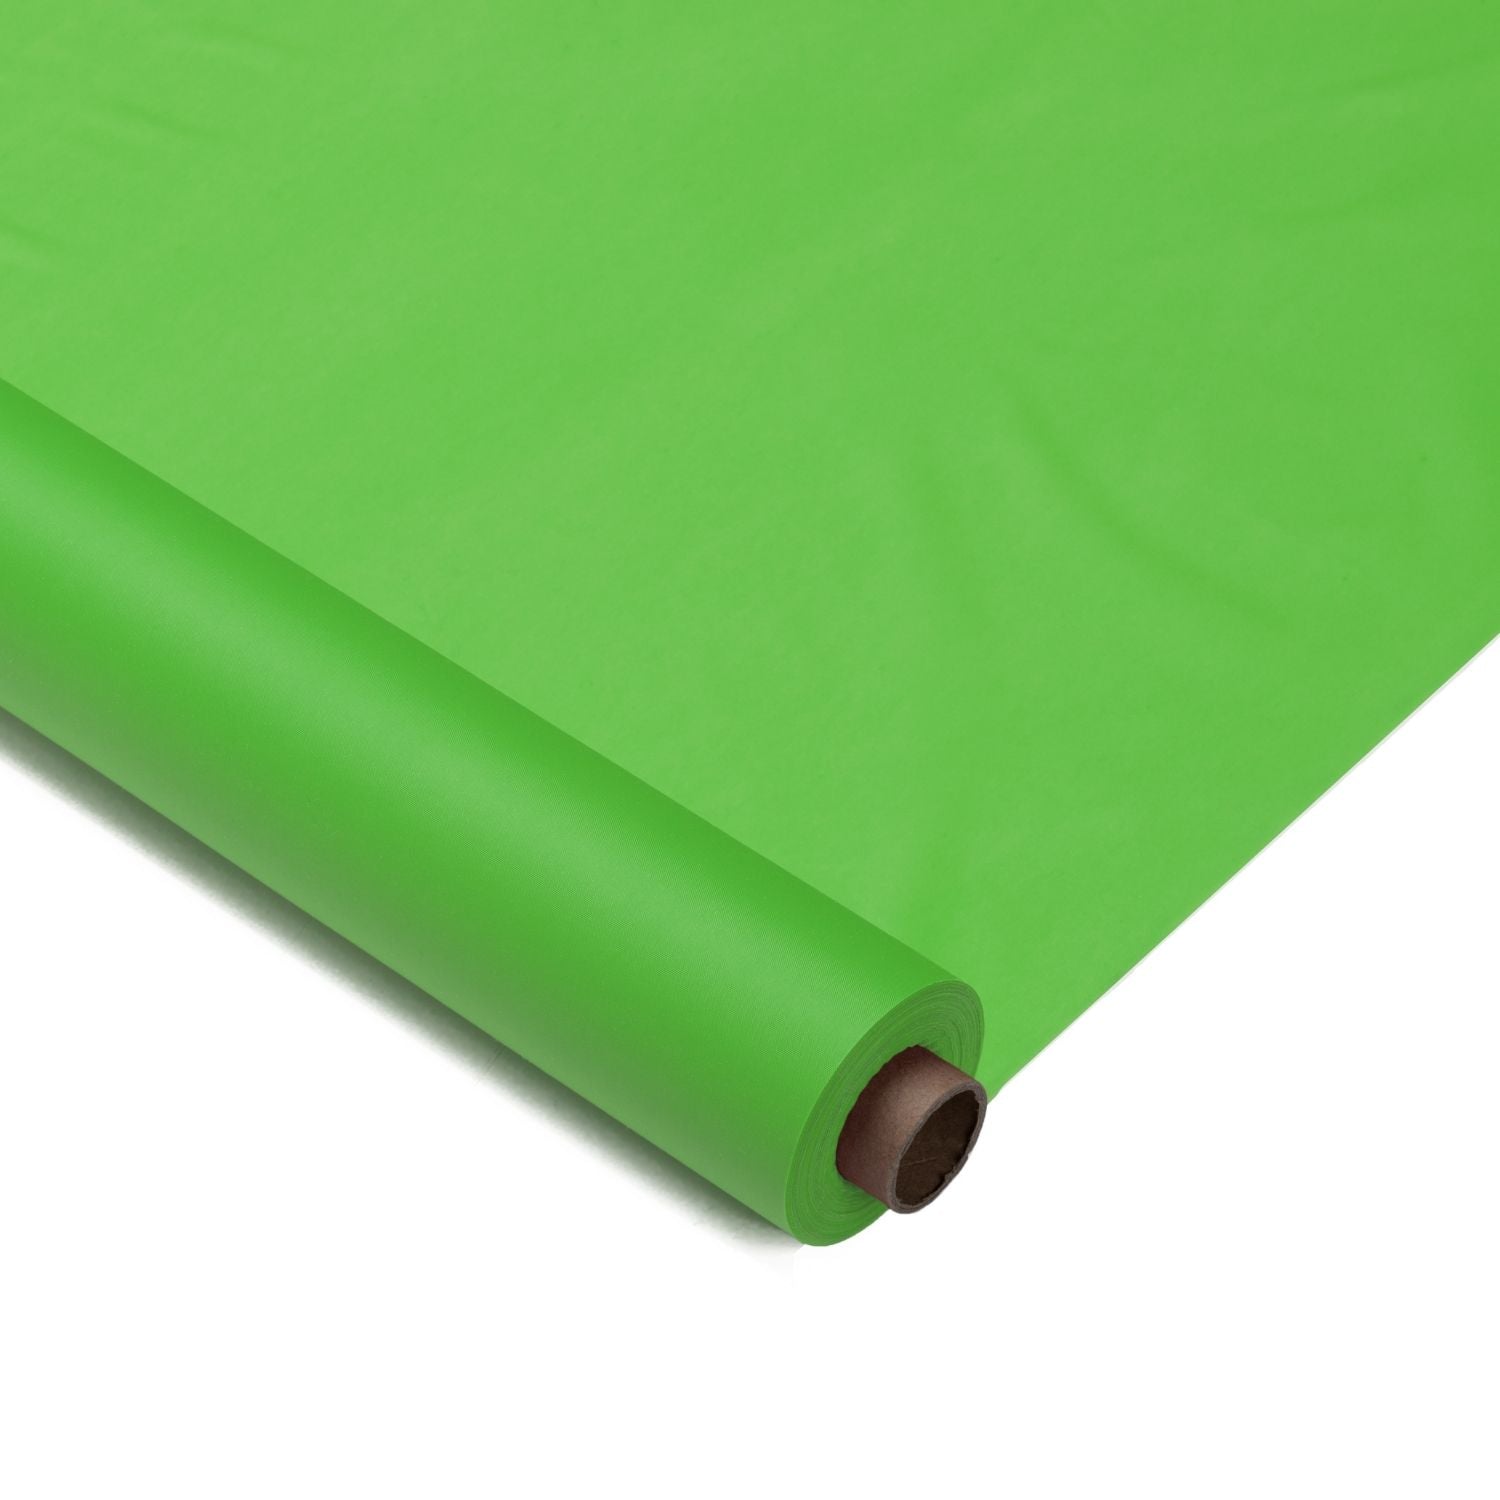 40 In. X 100 Ft. Premium Lime Green Plastic Table Roll | 6 Pack